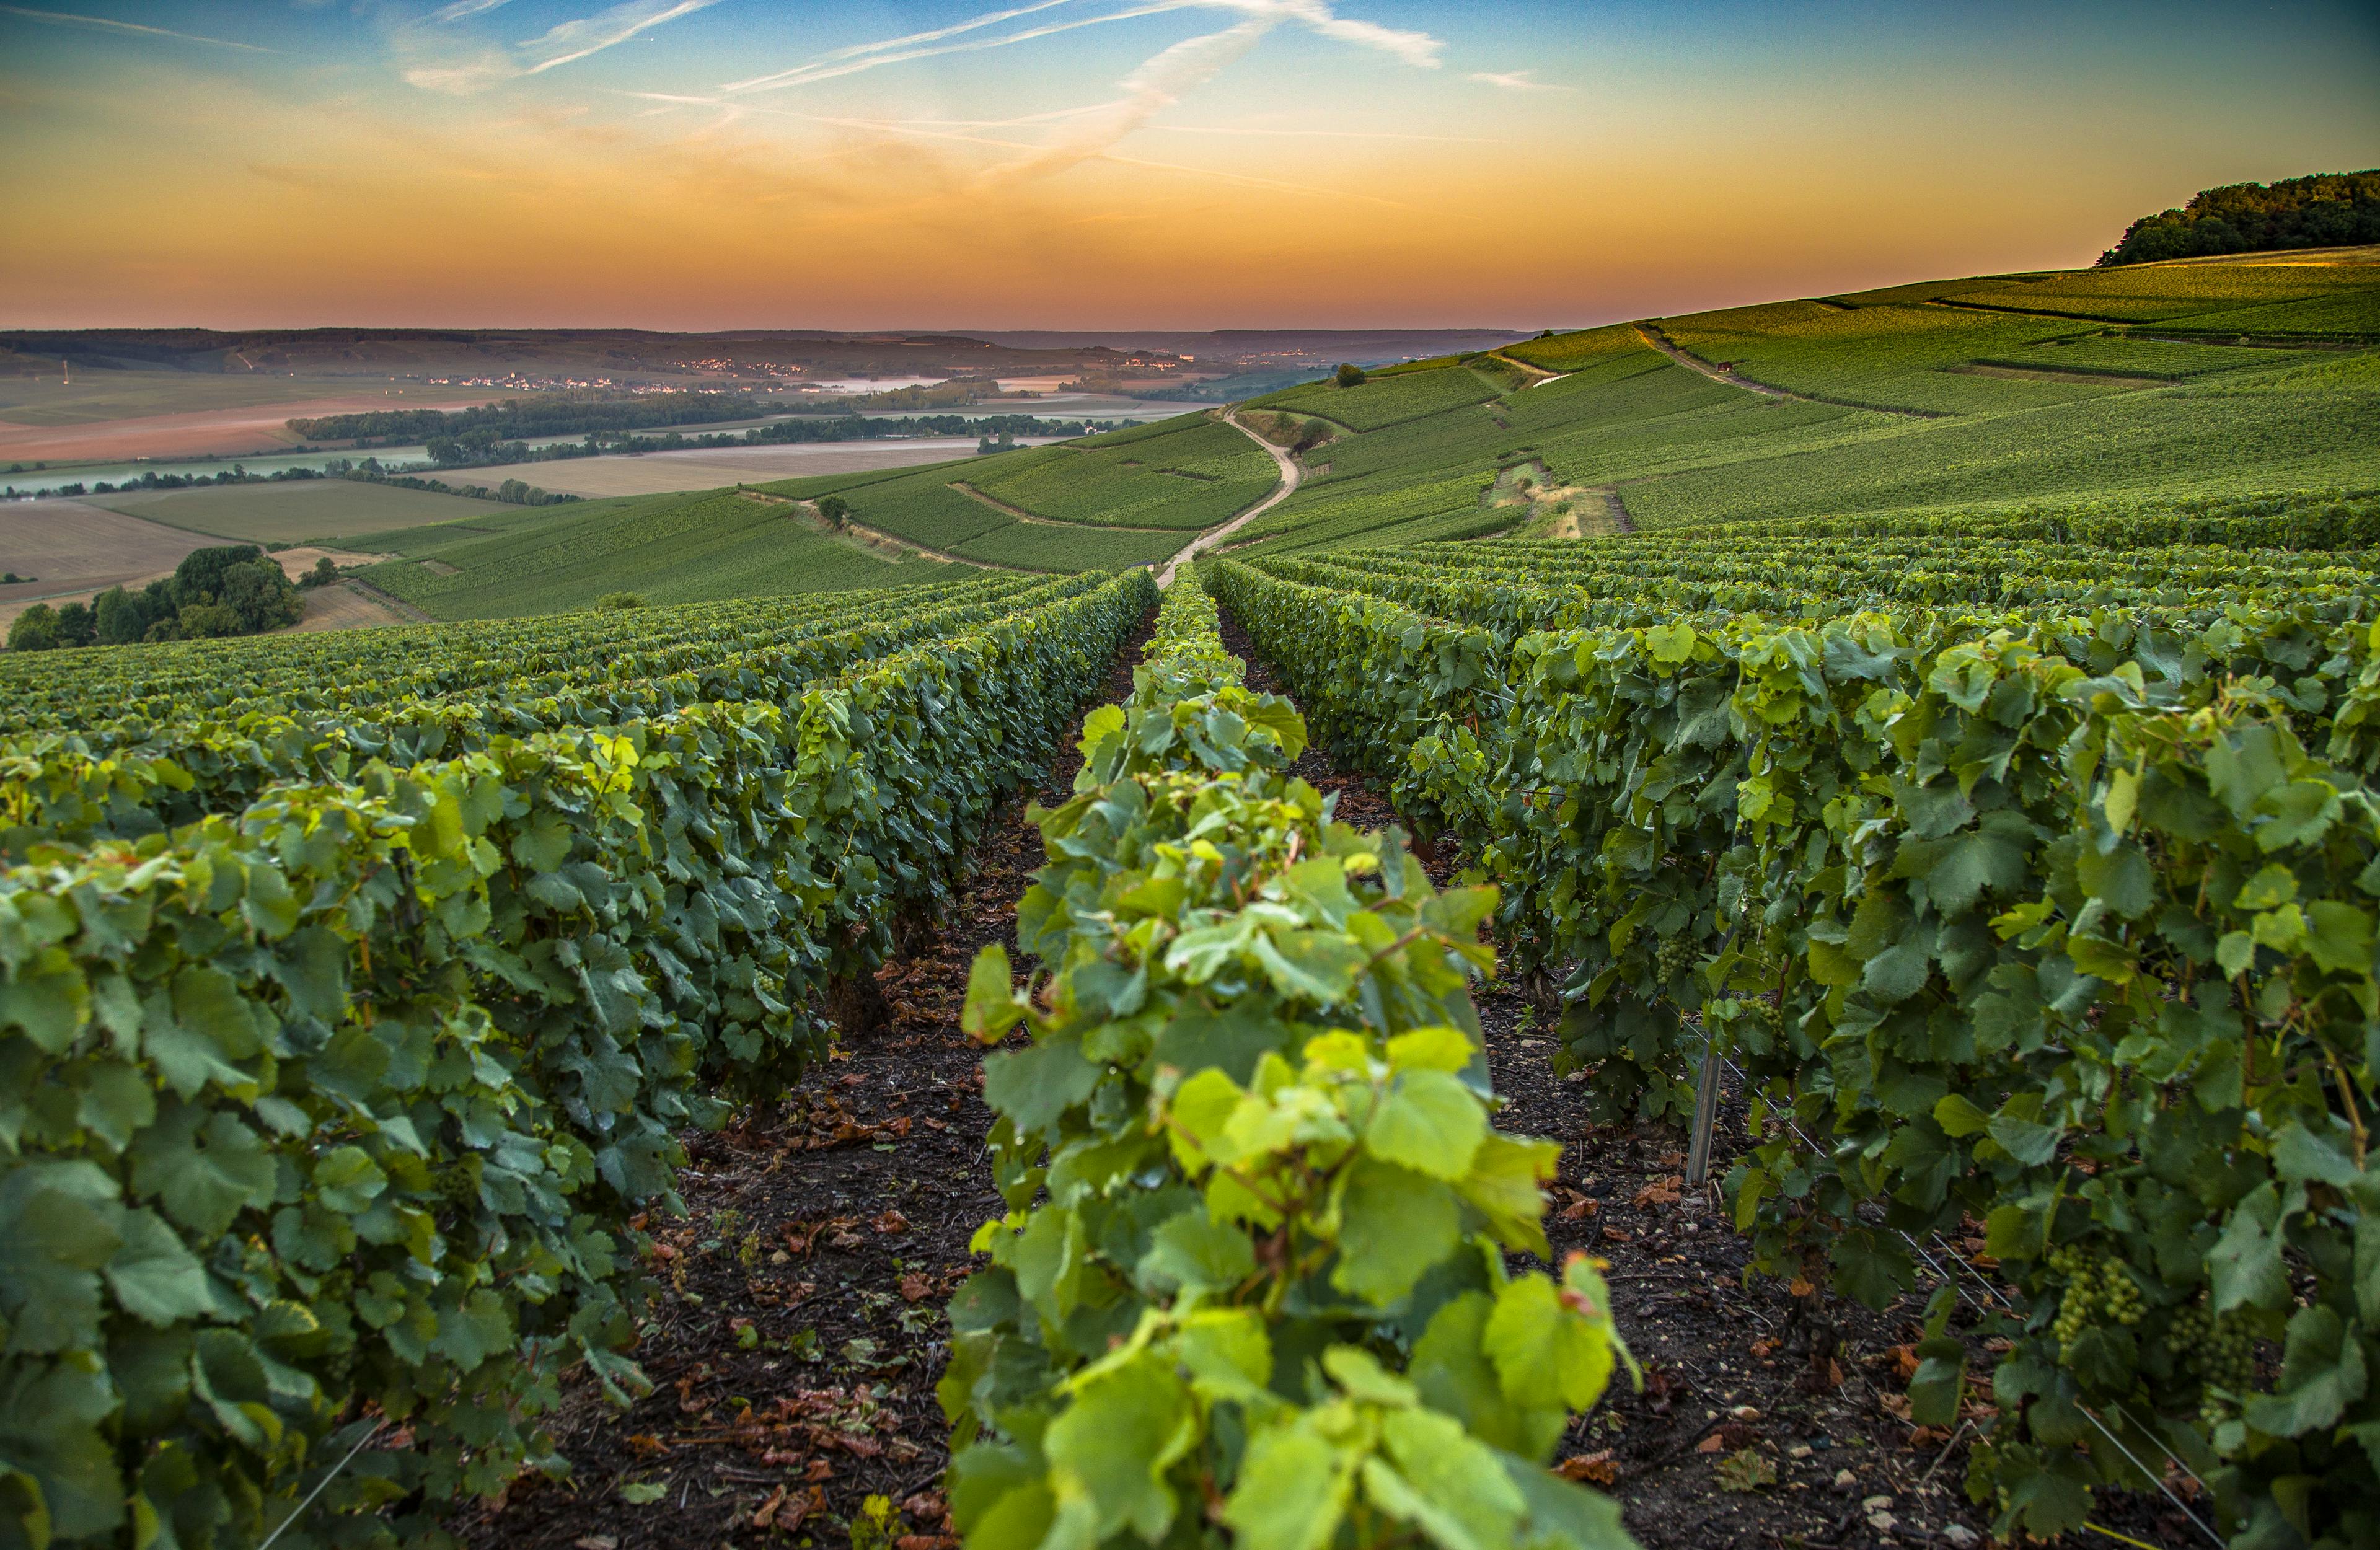 Champagne region in France. A beautiful vineyard during the sunrise.